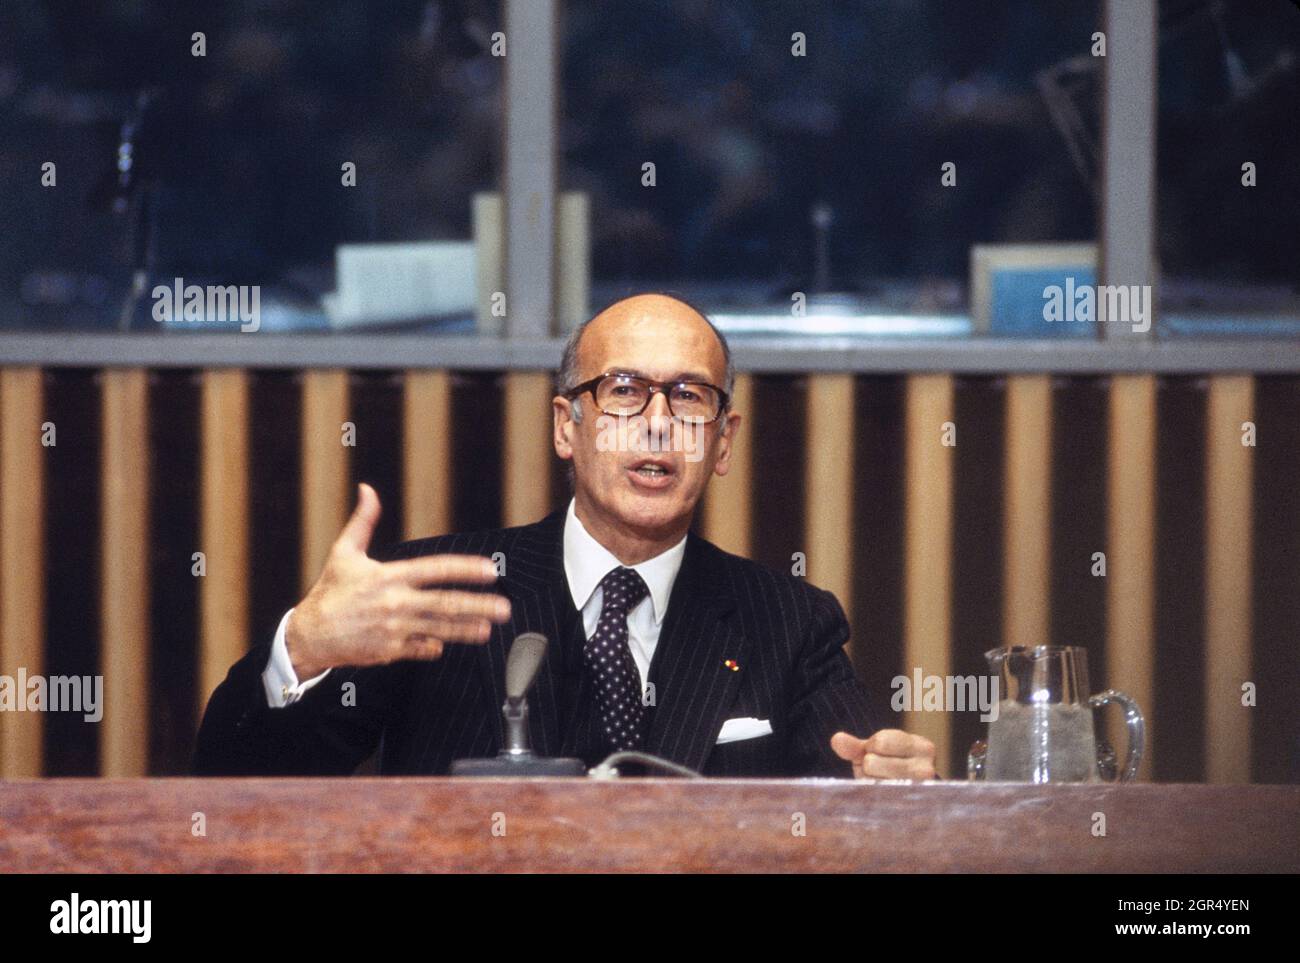 French President Valery Giscard d'Estaing, addressing United Nations General Assembly, New York City, New York, USA, May 24, 1978 Stock Photo